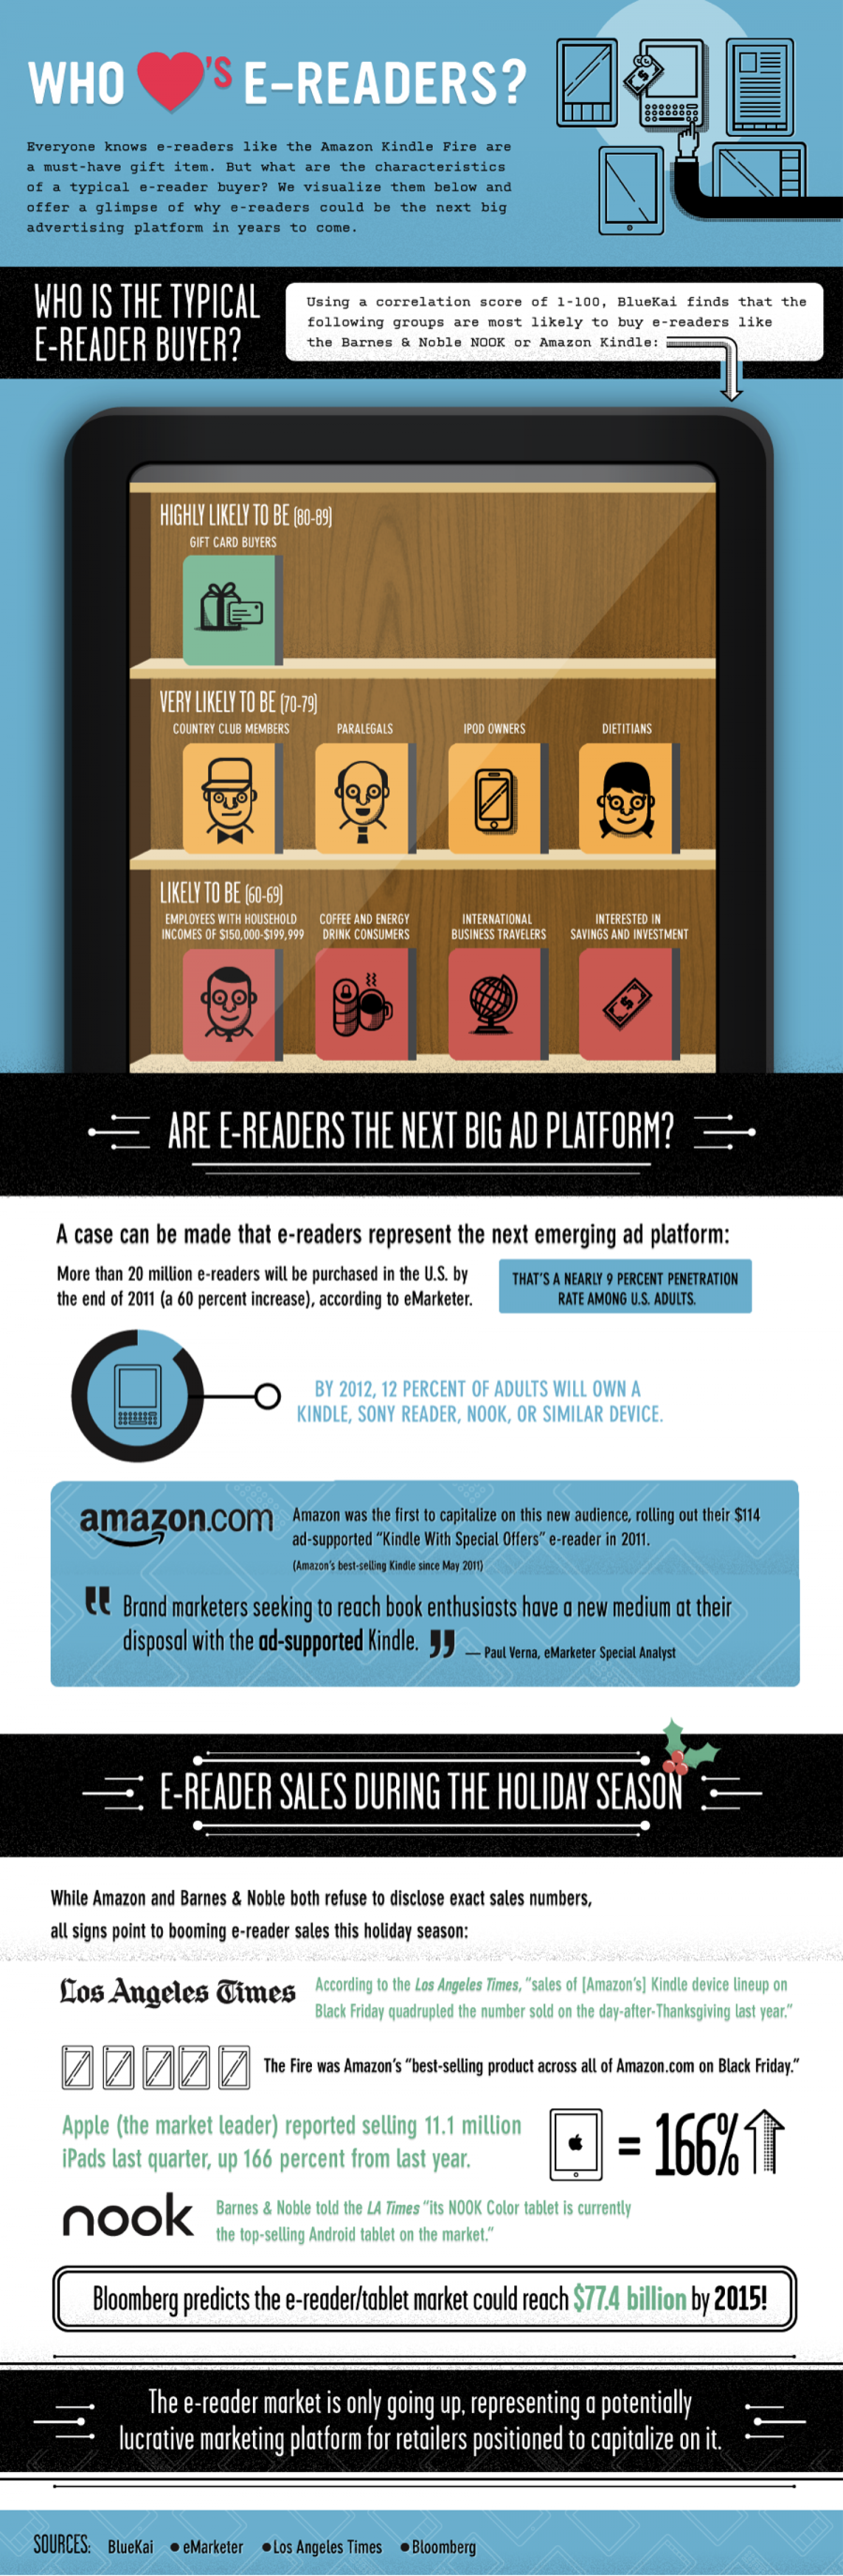 Who Is the Typical E-reader Buyer? Infographic